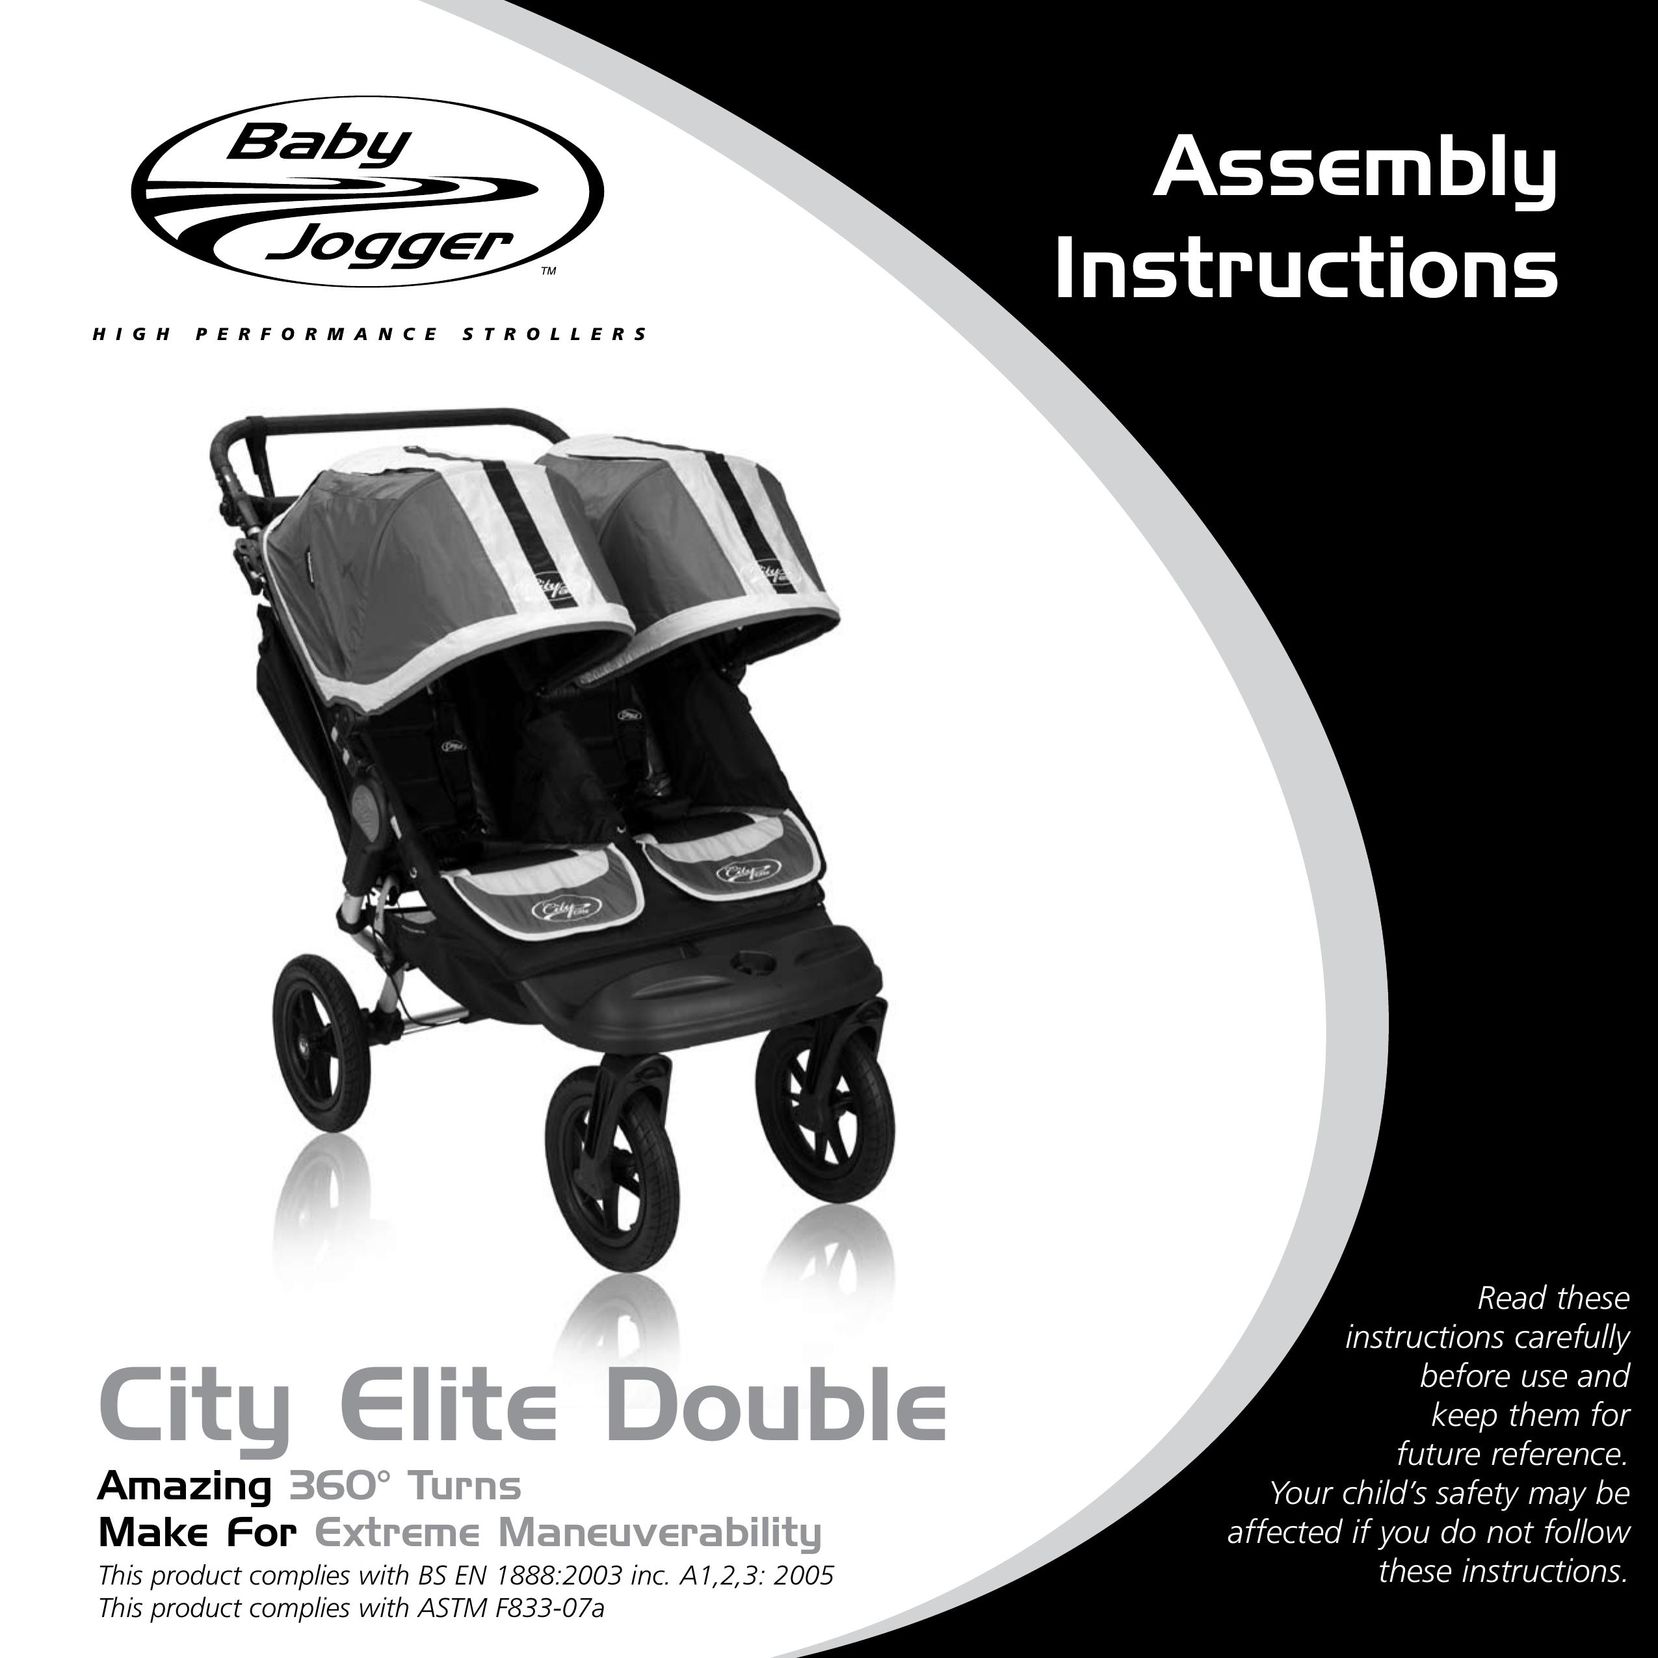 Baby Jogger ASTM F833-07A Stroller User Manual